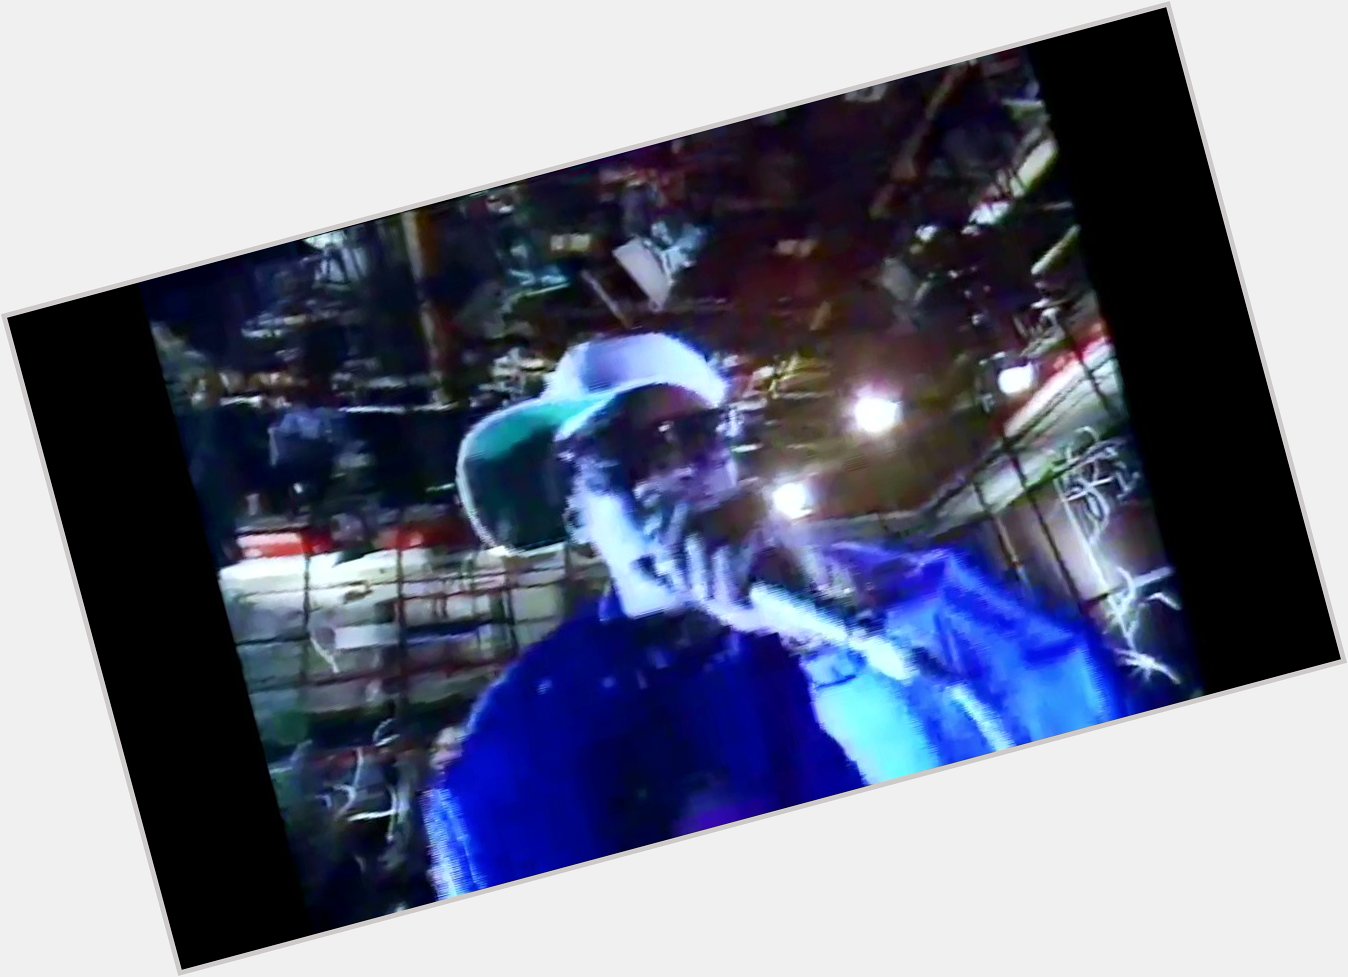 Happy birthday to Chuck D. Here are Public Enemy performing 911 Is a Joke live in 1990.
